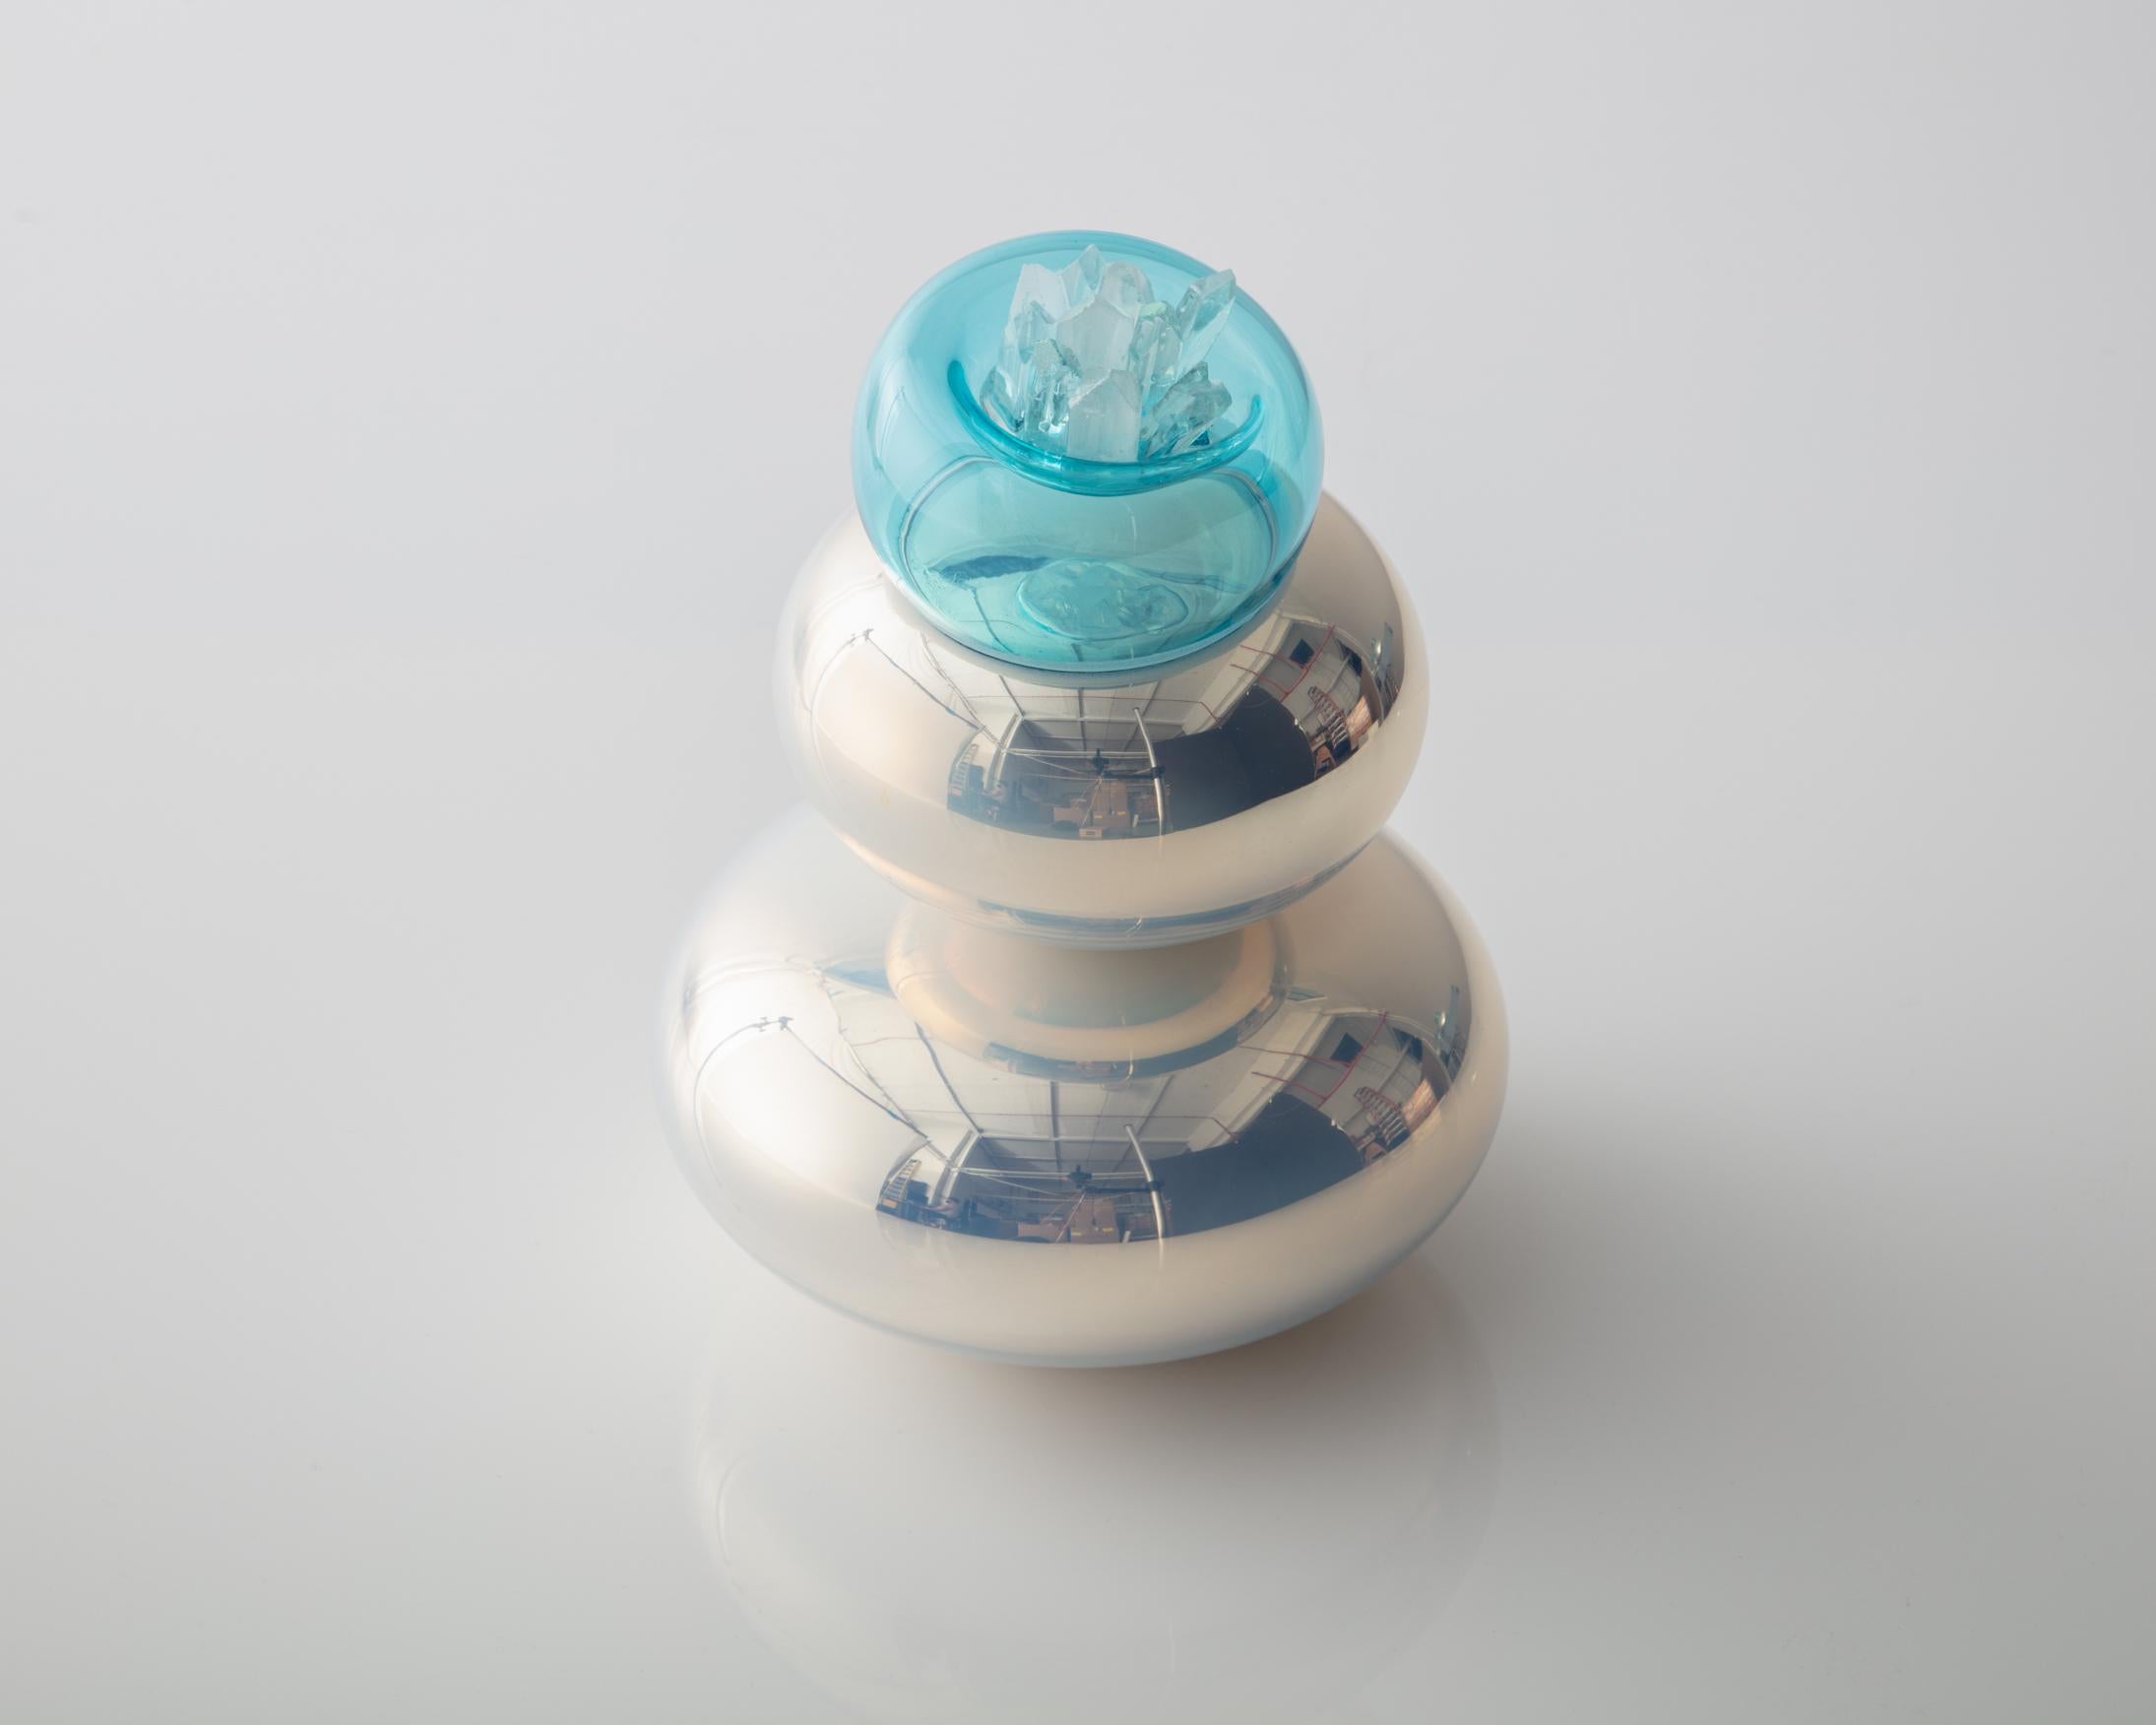 Contemporary Three-Tiered Stacked Bubble Sculpture by Jeff Zimmerman For Sale